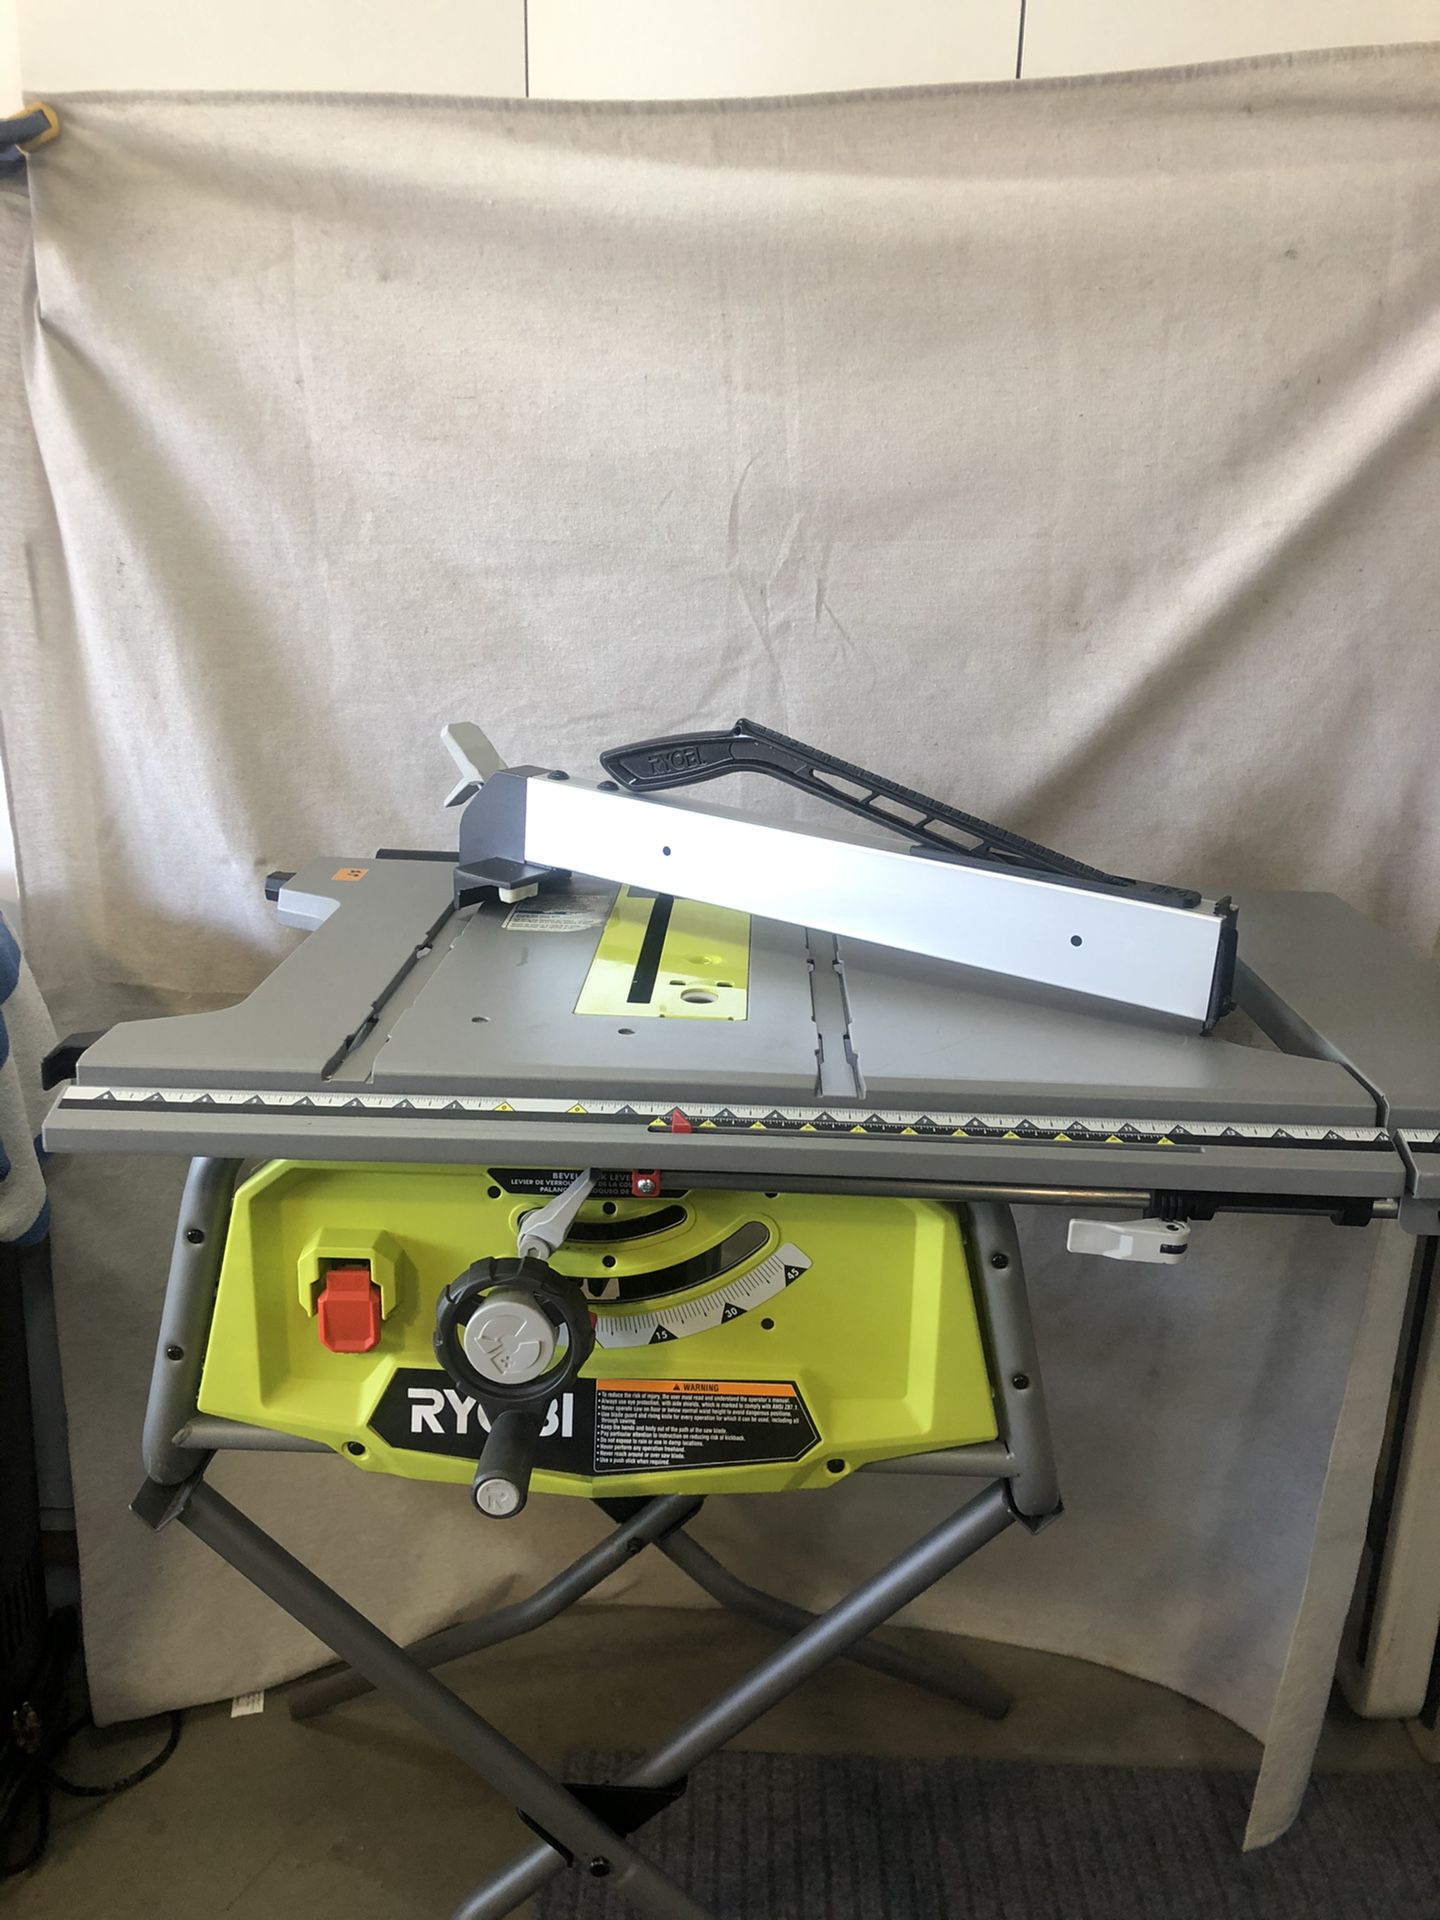 Ryobi Expanded capacity 10”Table saw includes stand and guide fence